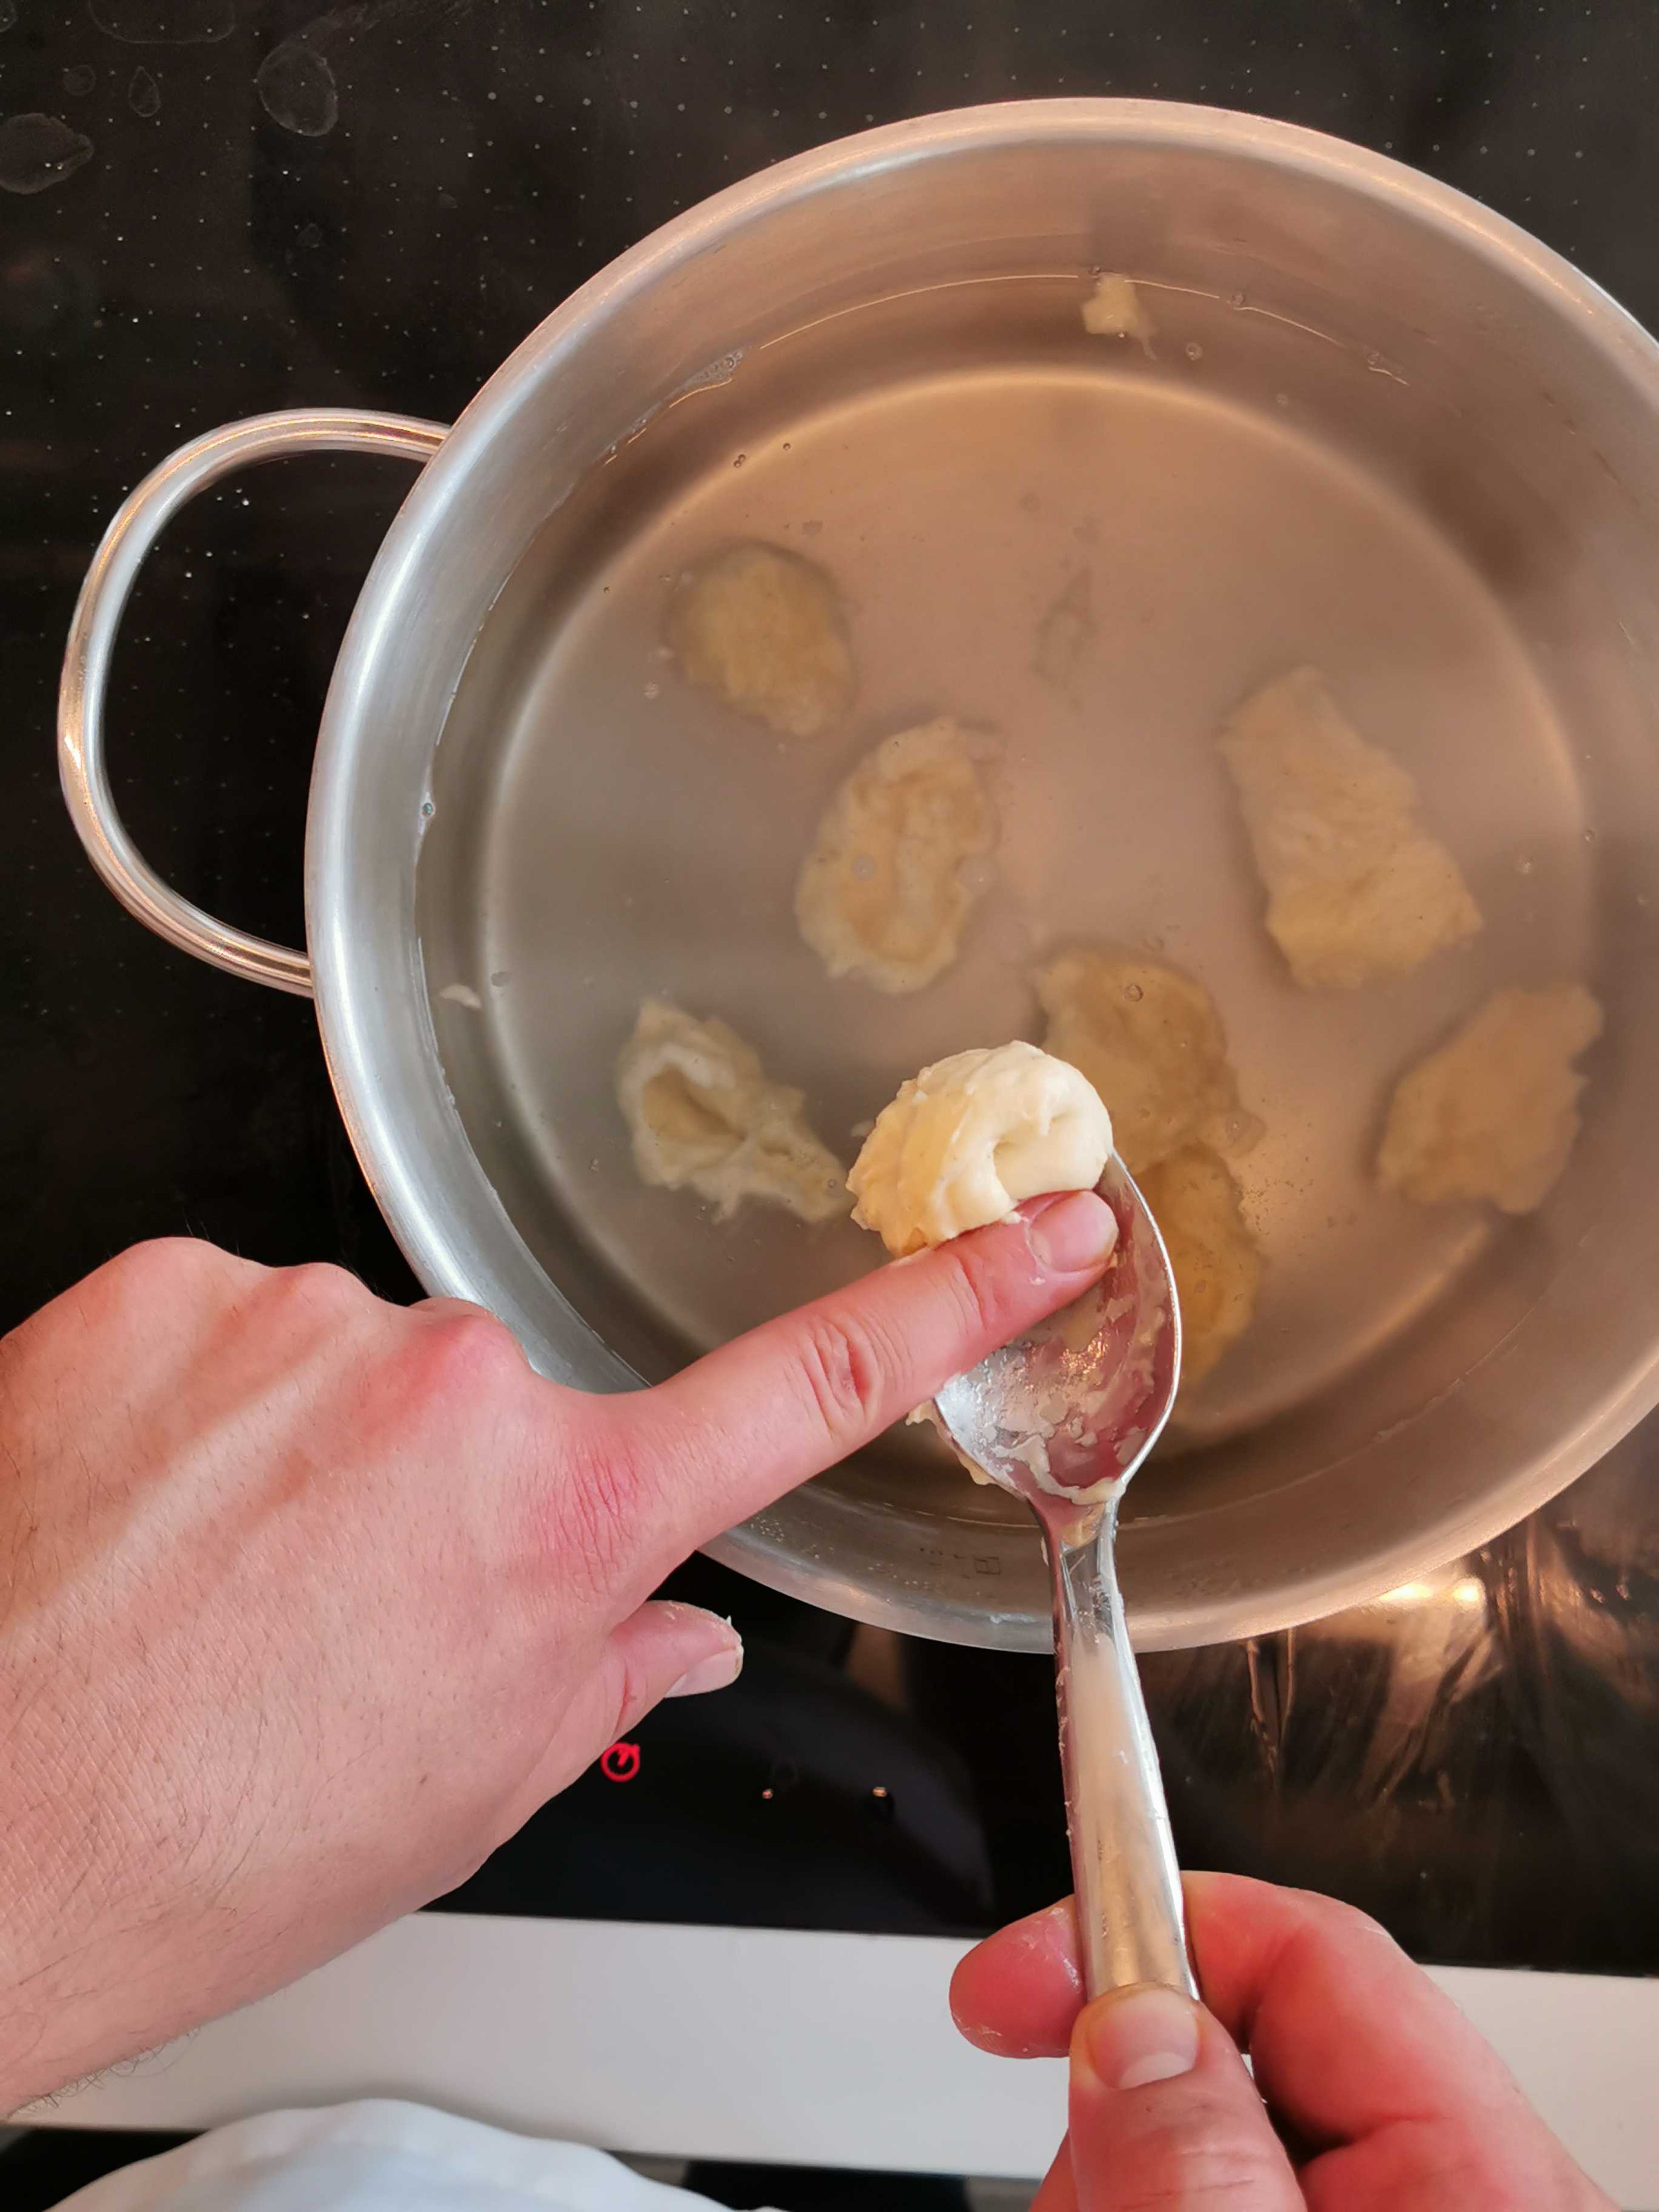 Use a spoon to form smaller parts of the dough into dumplings. Add to the pot and let them simmer for 5 minutes. Peel potatoes, cut into thicker sticks, and let them boil in salted water until they are done.